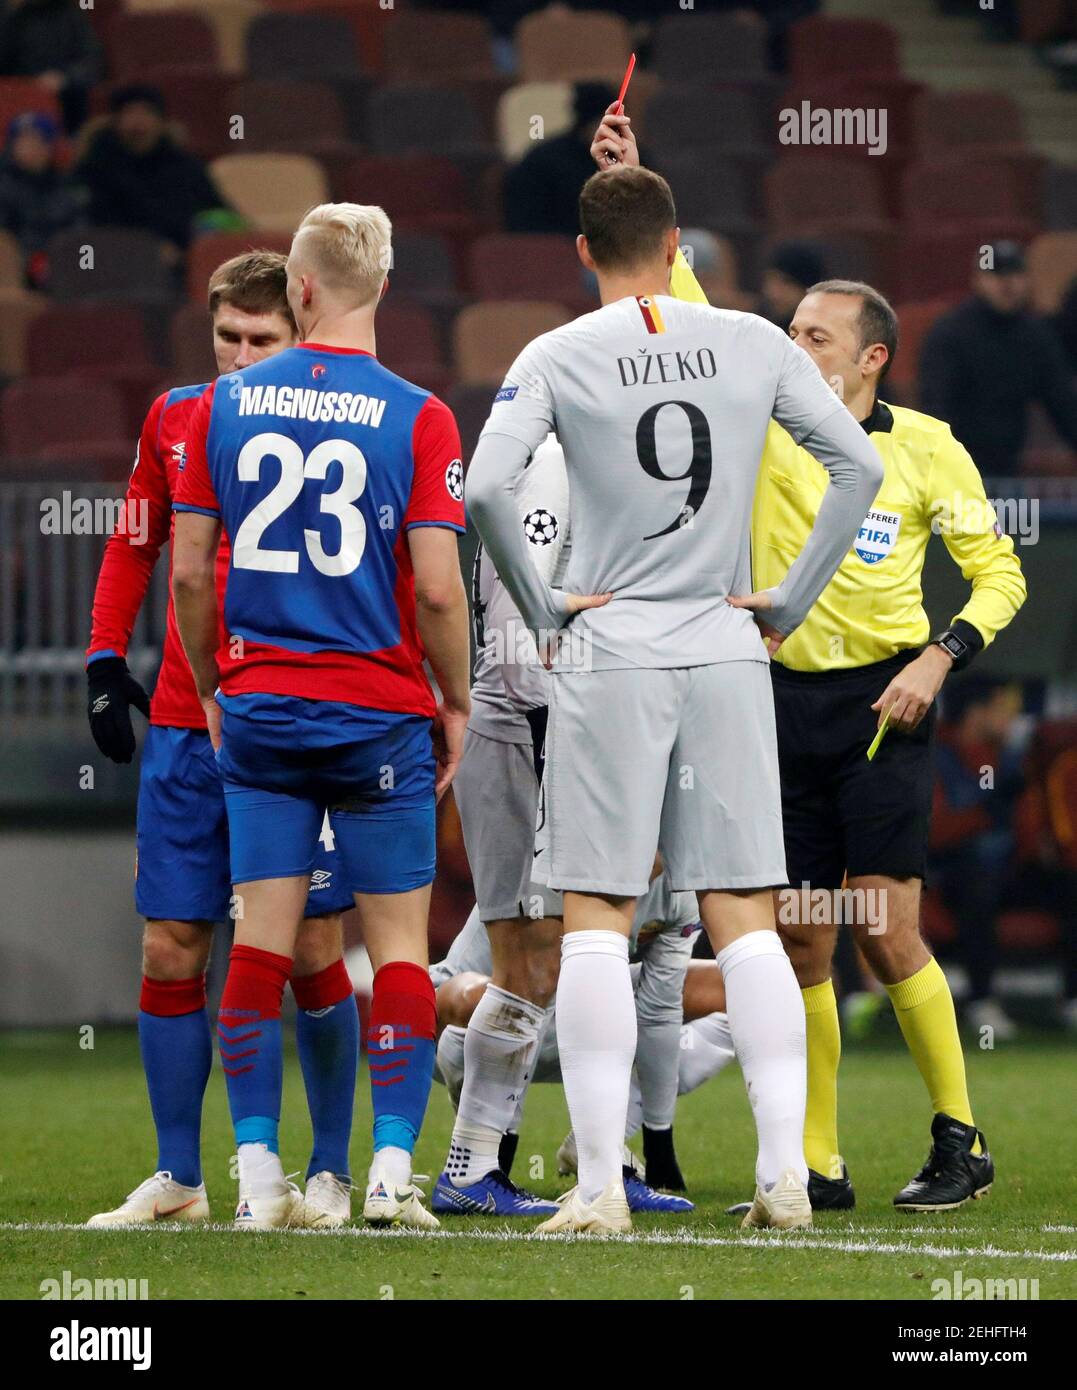 Soccer Football - Champions League - Group Stage - Group G - CSKA Moscow v AS Roma - Luzhniki Stadium, Moscow, Russia - November 7, 2018  CSKA Moscow's Hordur Magnusson is shown a red card by referee Cuneyt Cakir  REUTERS/Sergei Karpukhin Stock Photo